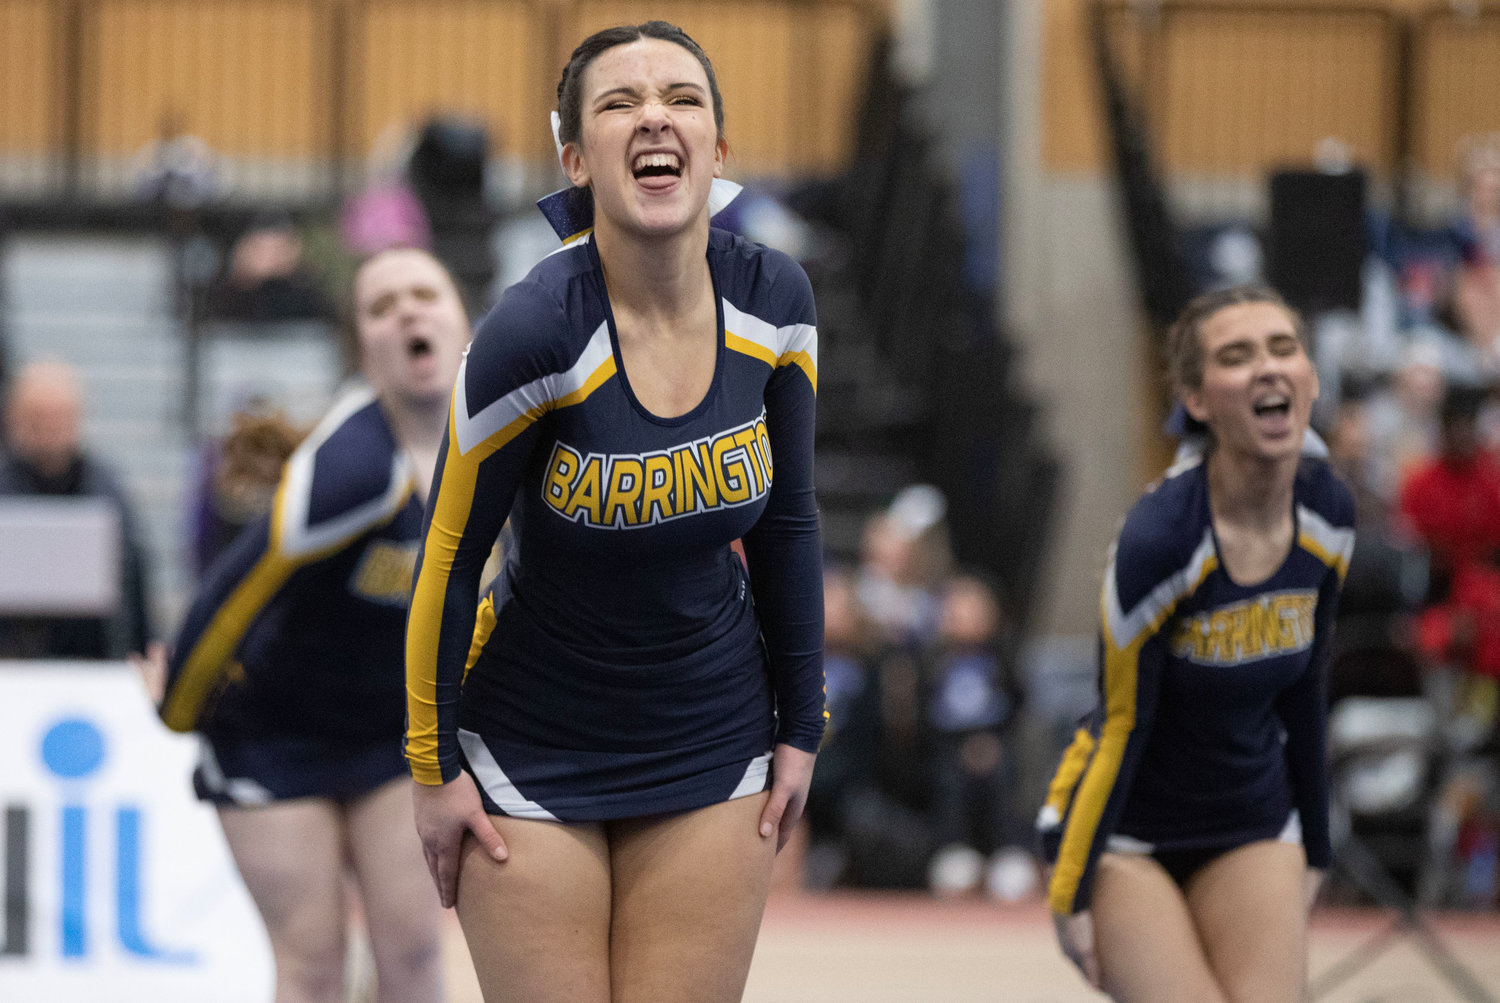 Barrington’s Abby Guertler and her teammates perform at the Rhode Island Interscholastic League Division II Cheer Competition.